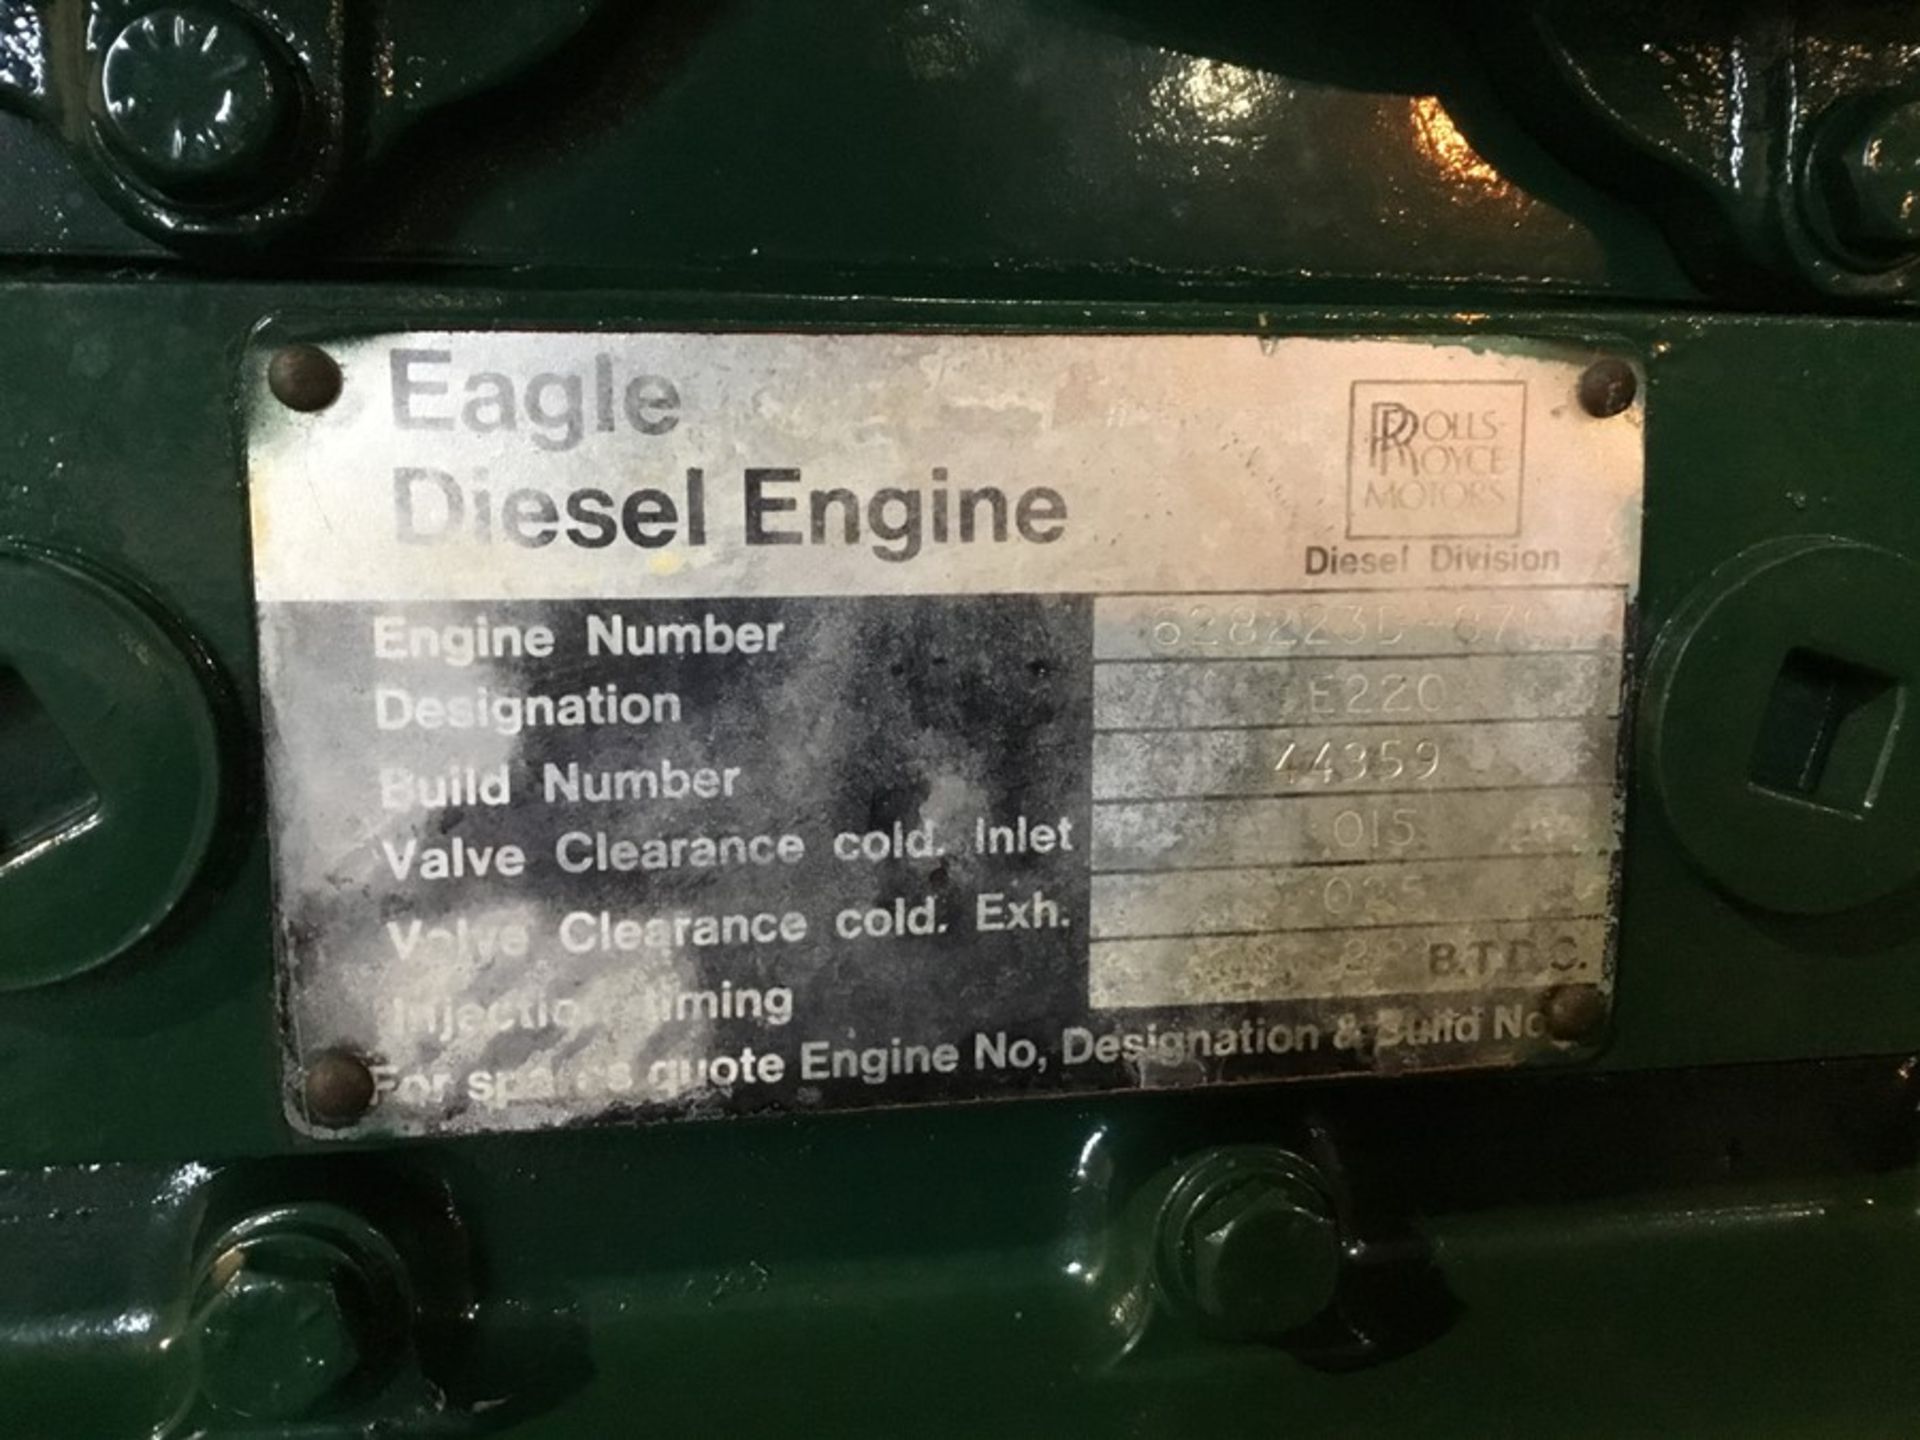 Rolls Royce E220 Diesel engine: Rolls Royce E220 6cyl Serial Number 628223D870/44359 build - Image 11 of 18